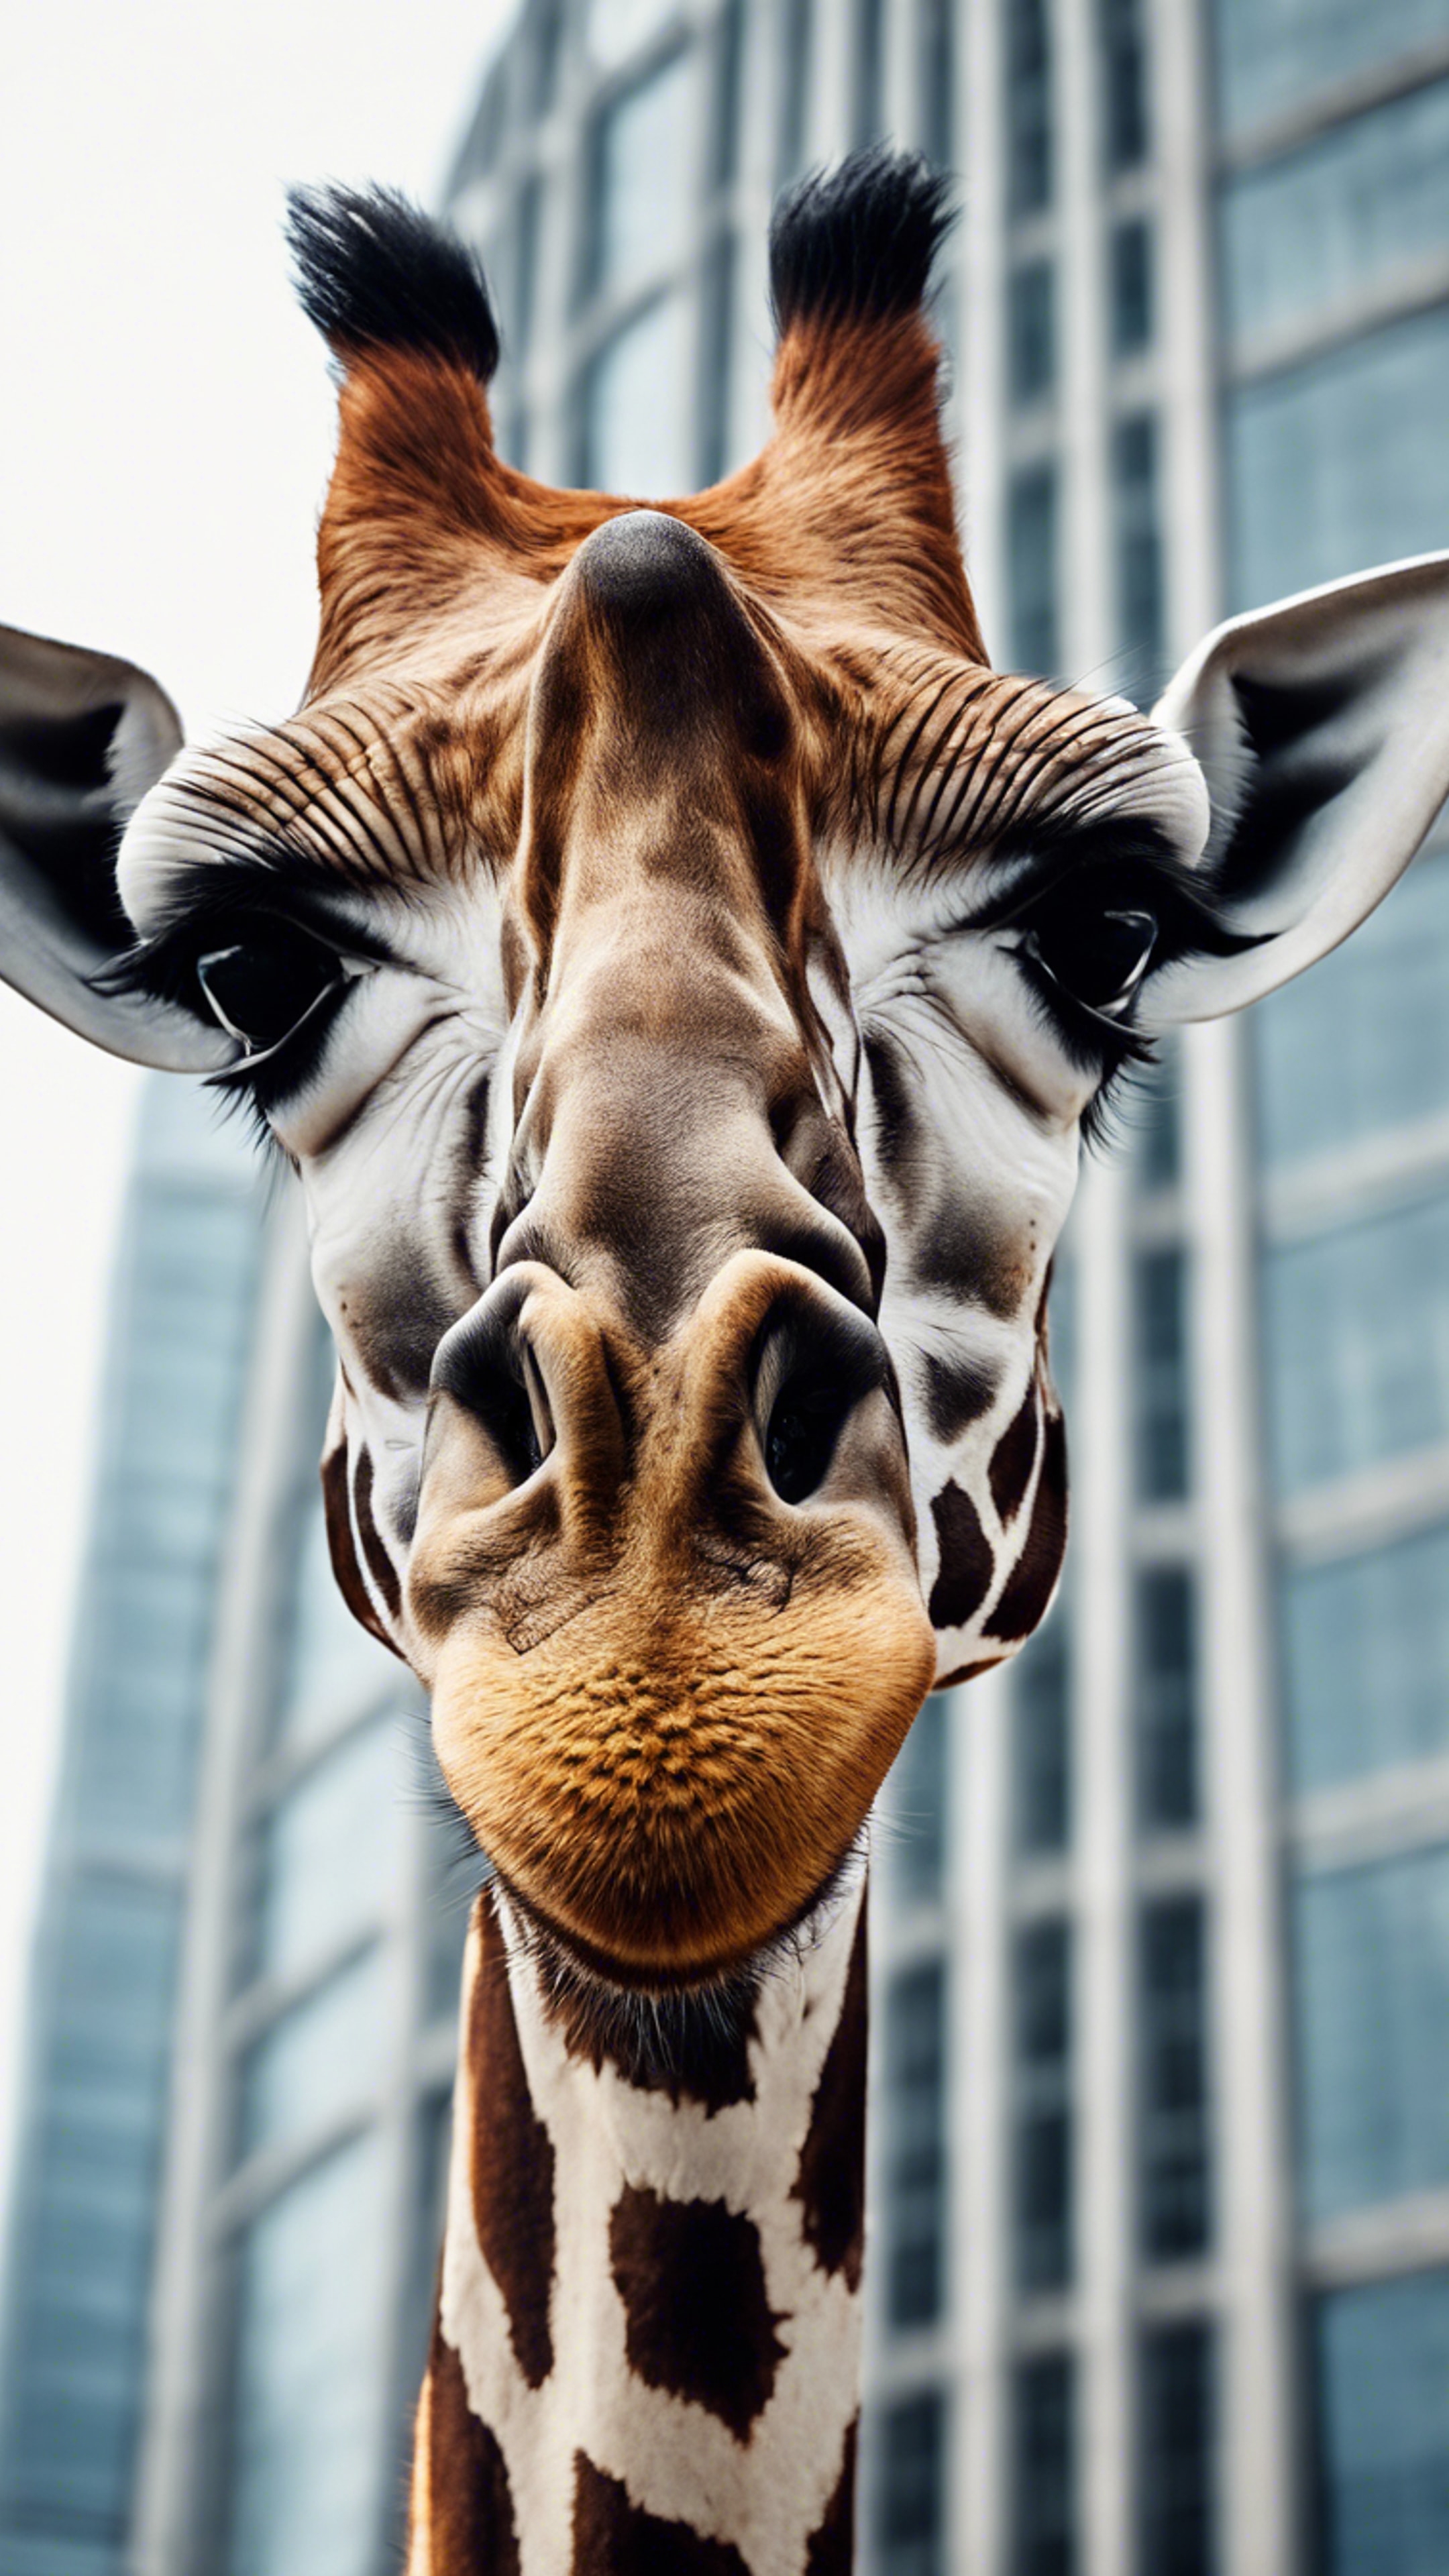 A giraffe in an urban setting, poking its head out from behind a skyscraper, symbolising wild nature confronting urbanisation.壁紙[4646bbcdc786429d9f19]